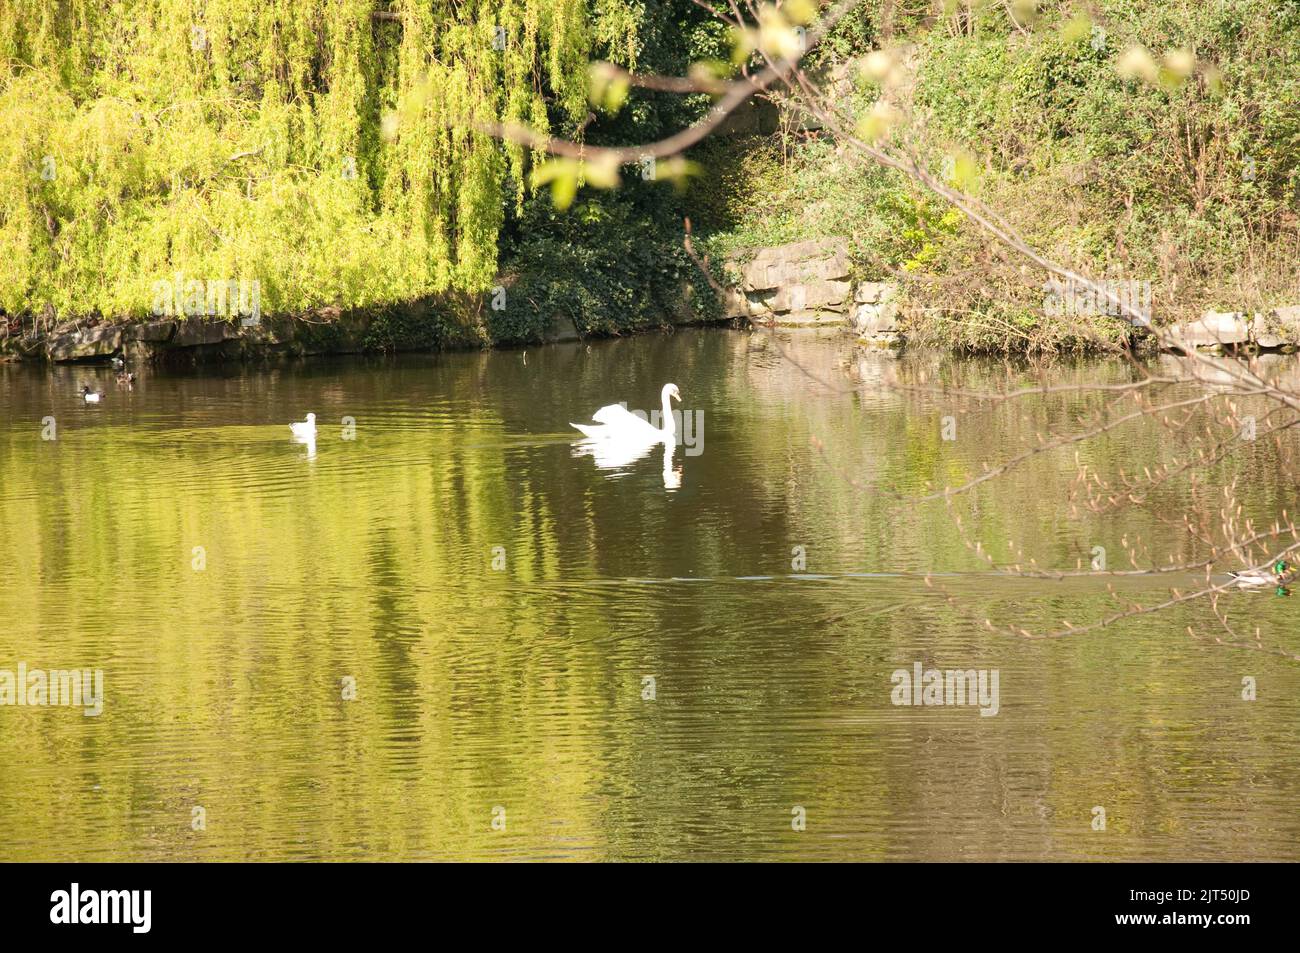 Swan on Lake, St Stephen's Green, Dublin, Eire.  St Stephen's Green is a public park in Central Dublin, with large areas for walking and enjoying the Stock Photo